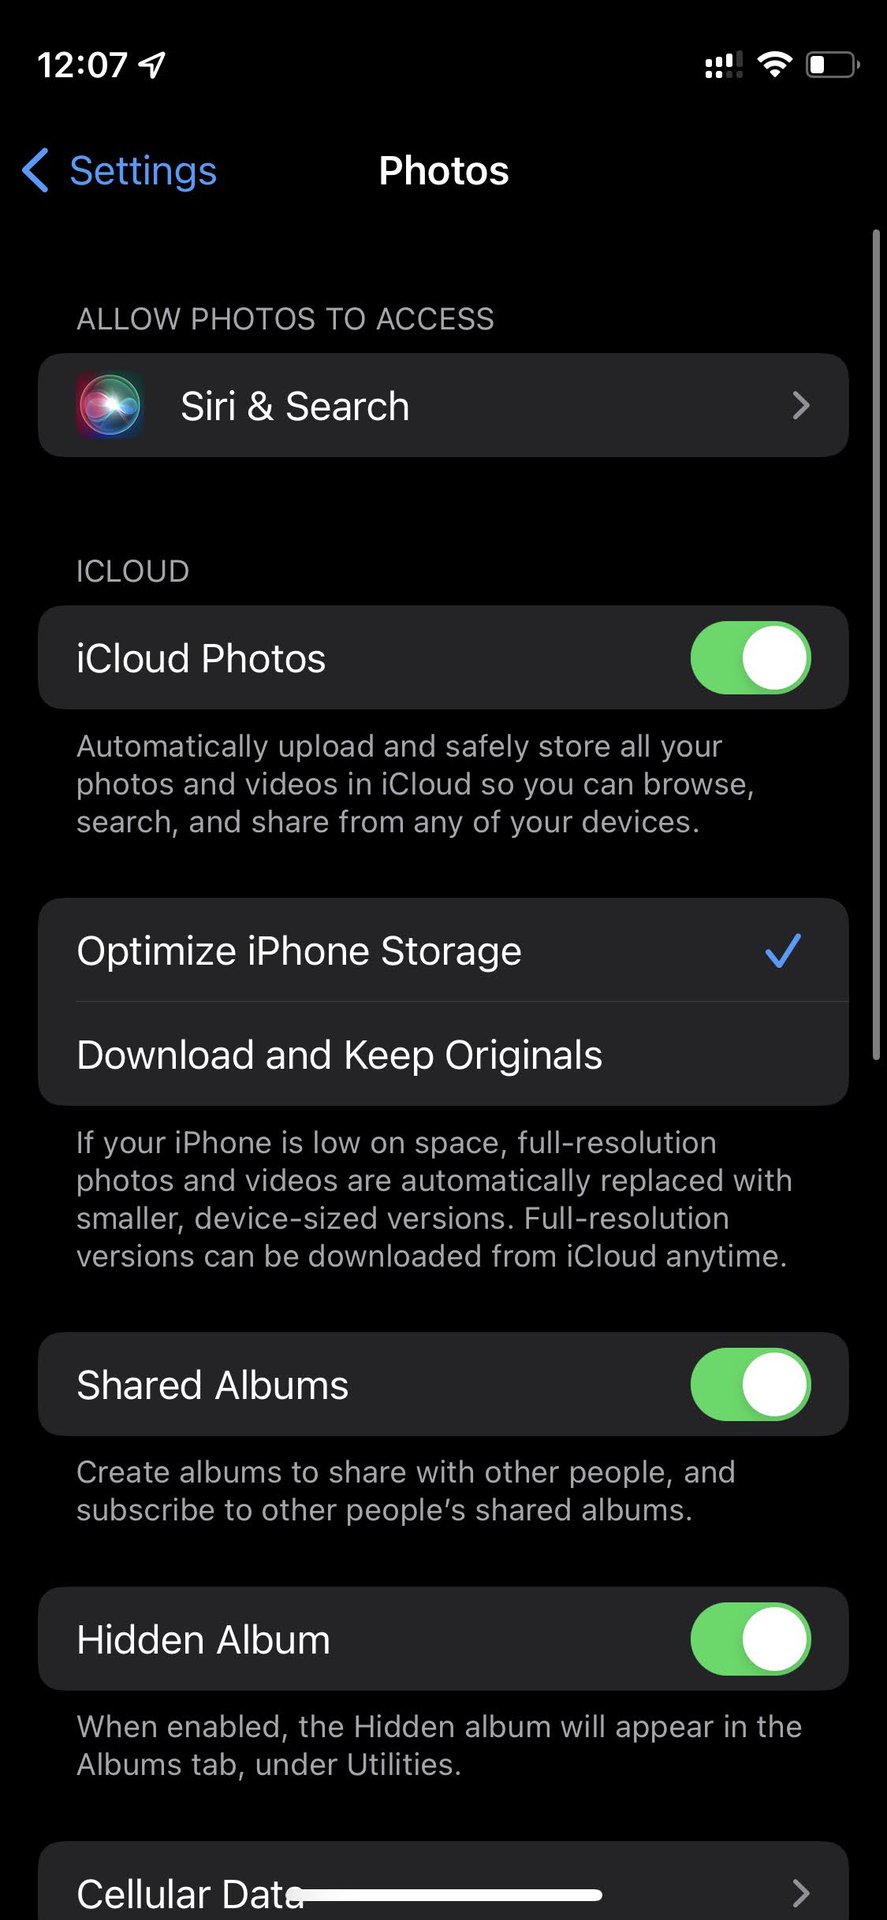 Transfer photos from iPhone to Android using iCloud 2